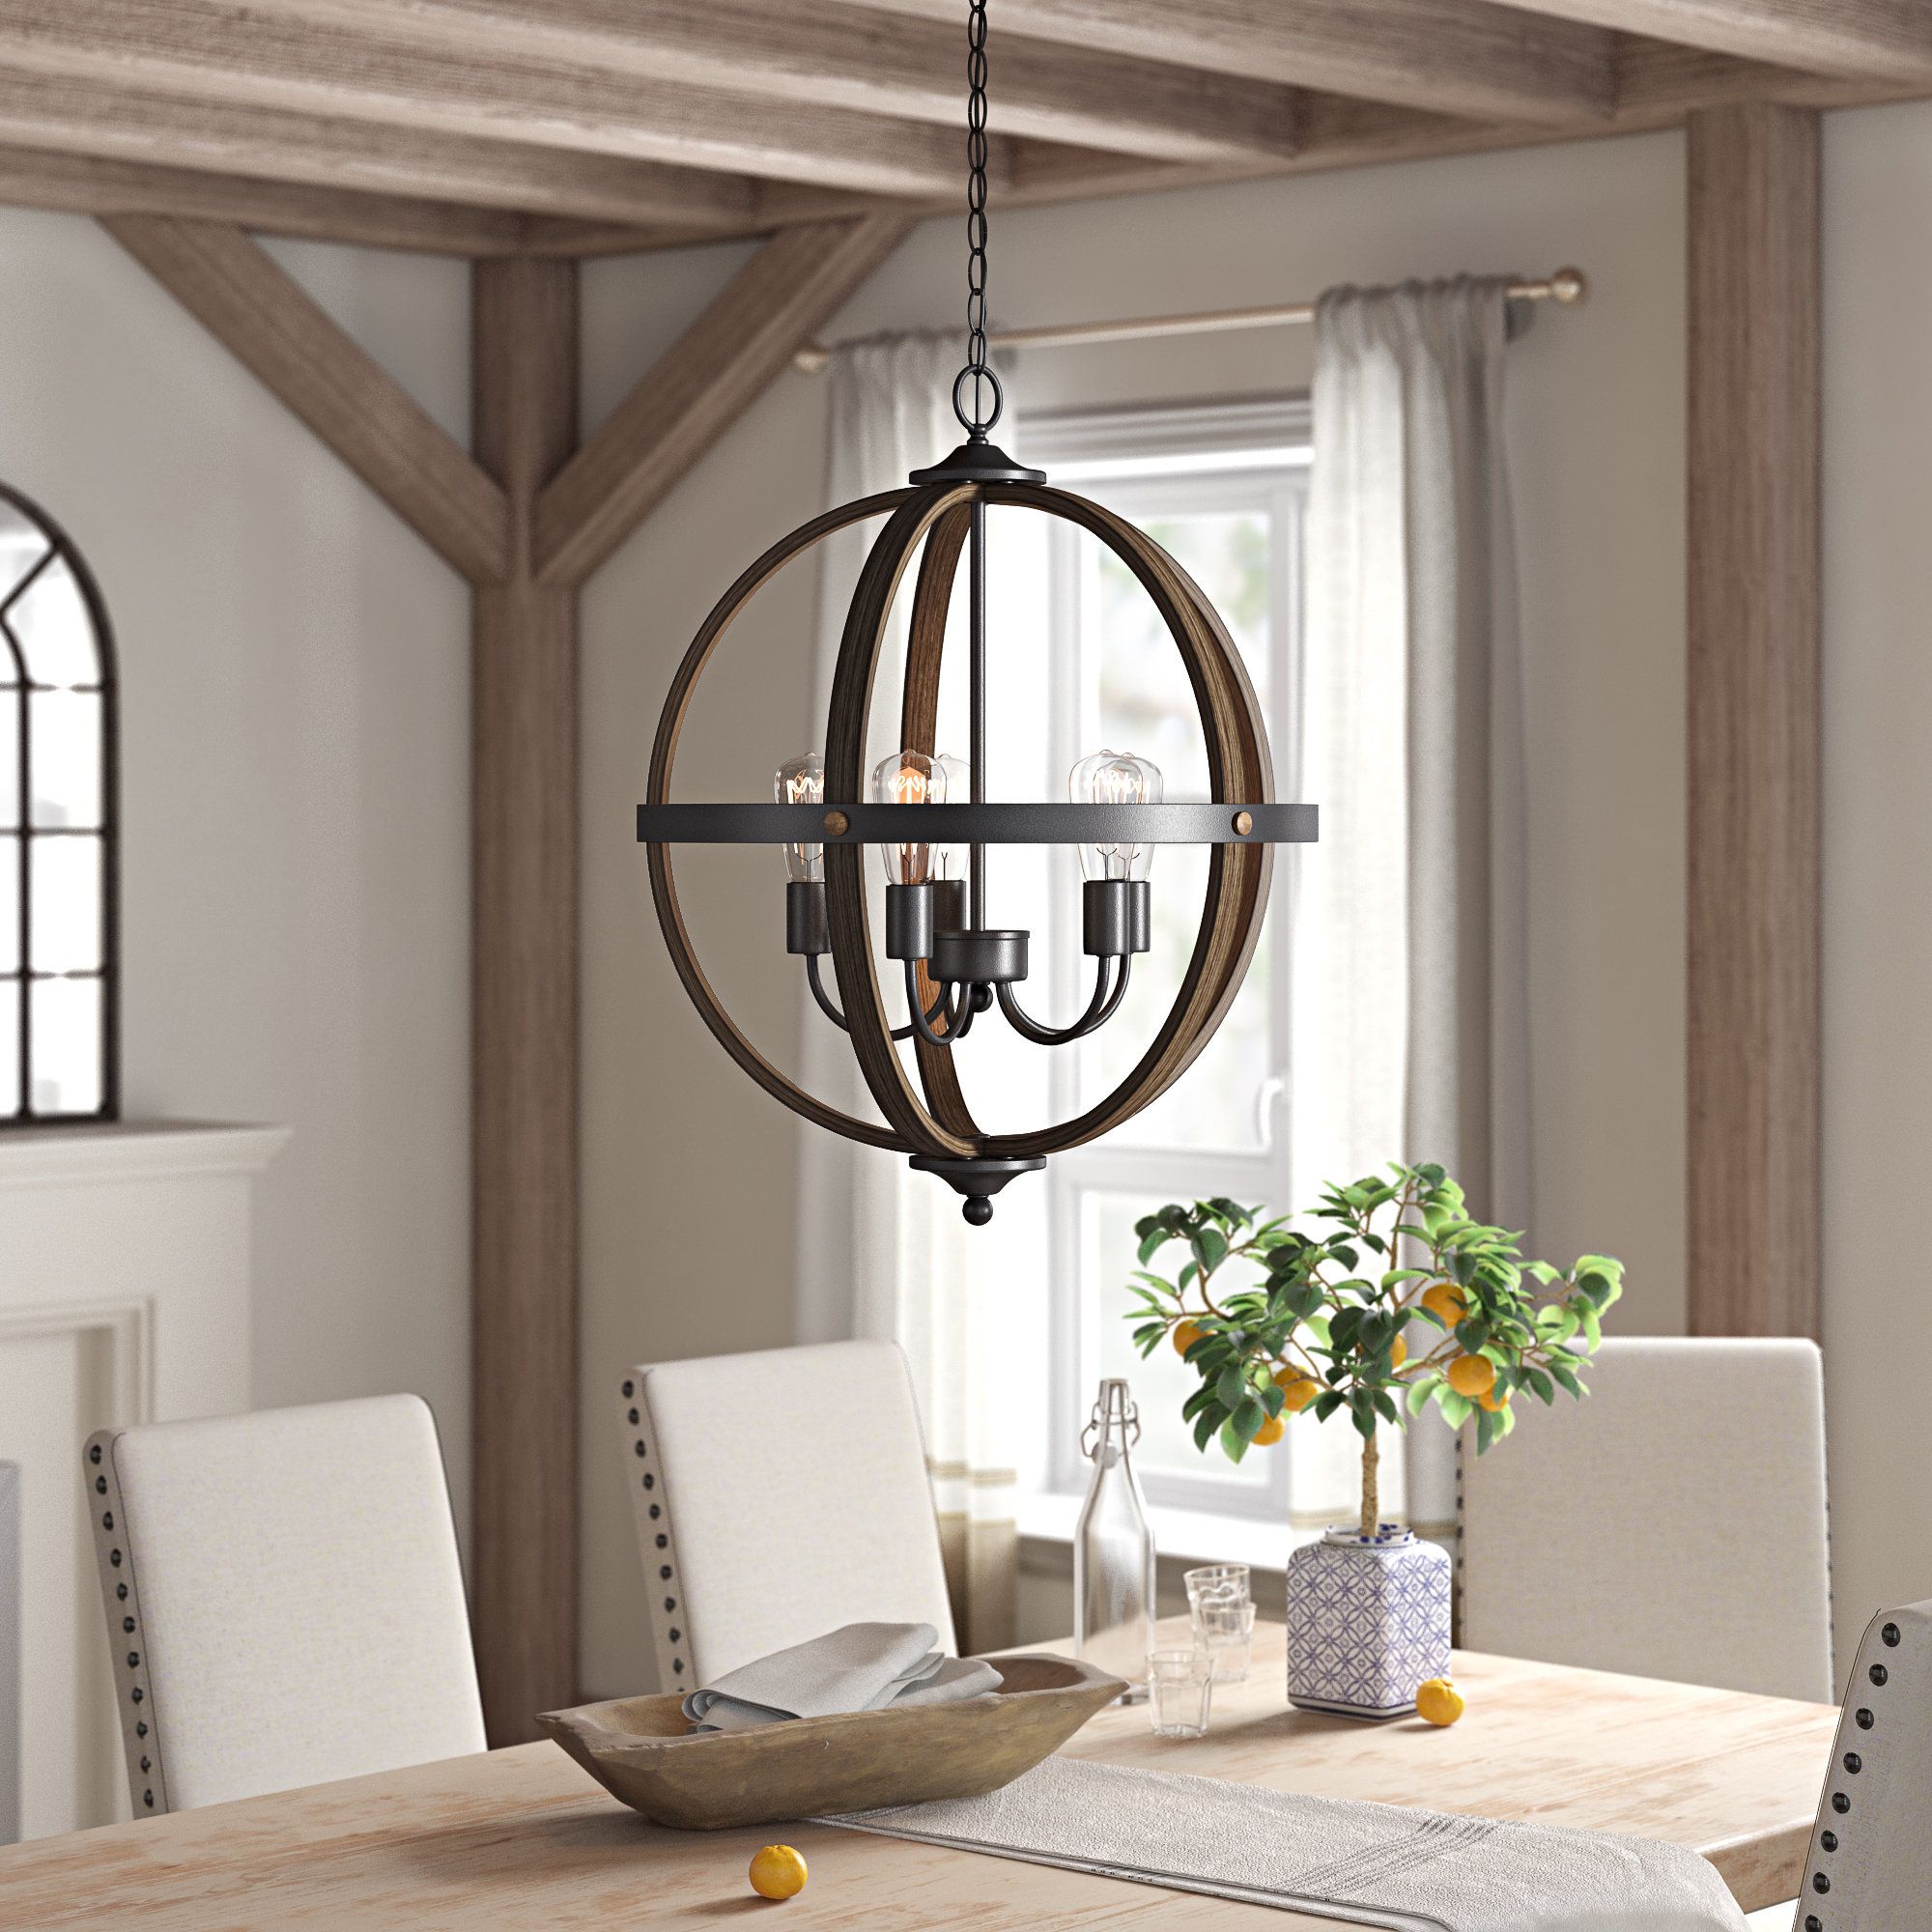 La Barge 3 Light Globe Chandeliers Pertaining To Most Recently Released Makeba 5 Light Globe Chandelier (View 16 of 20)